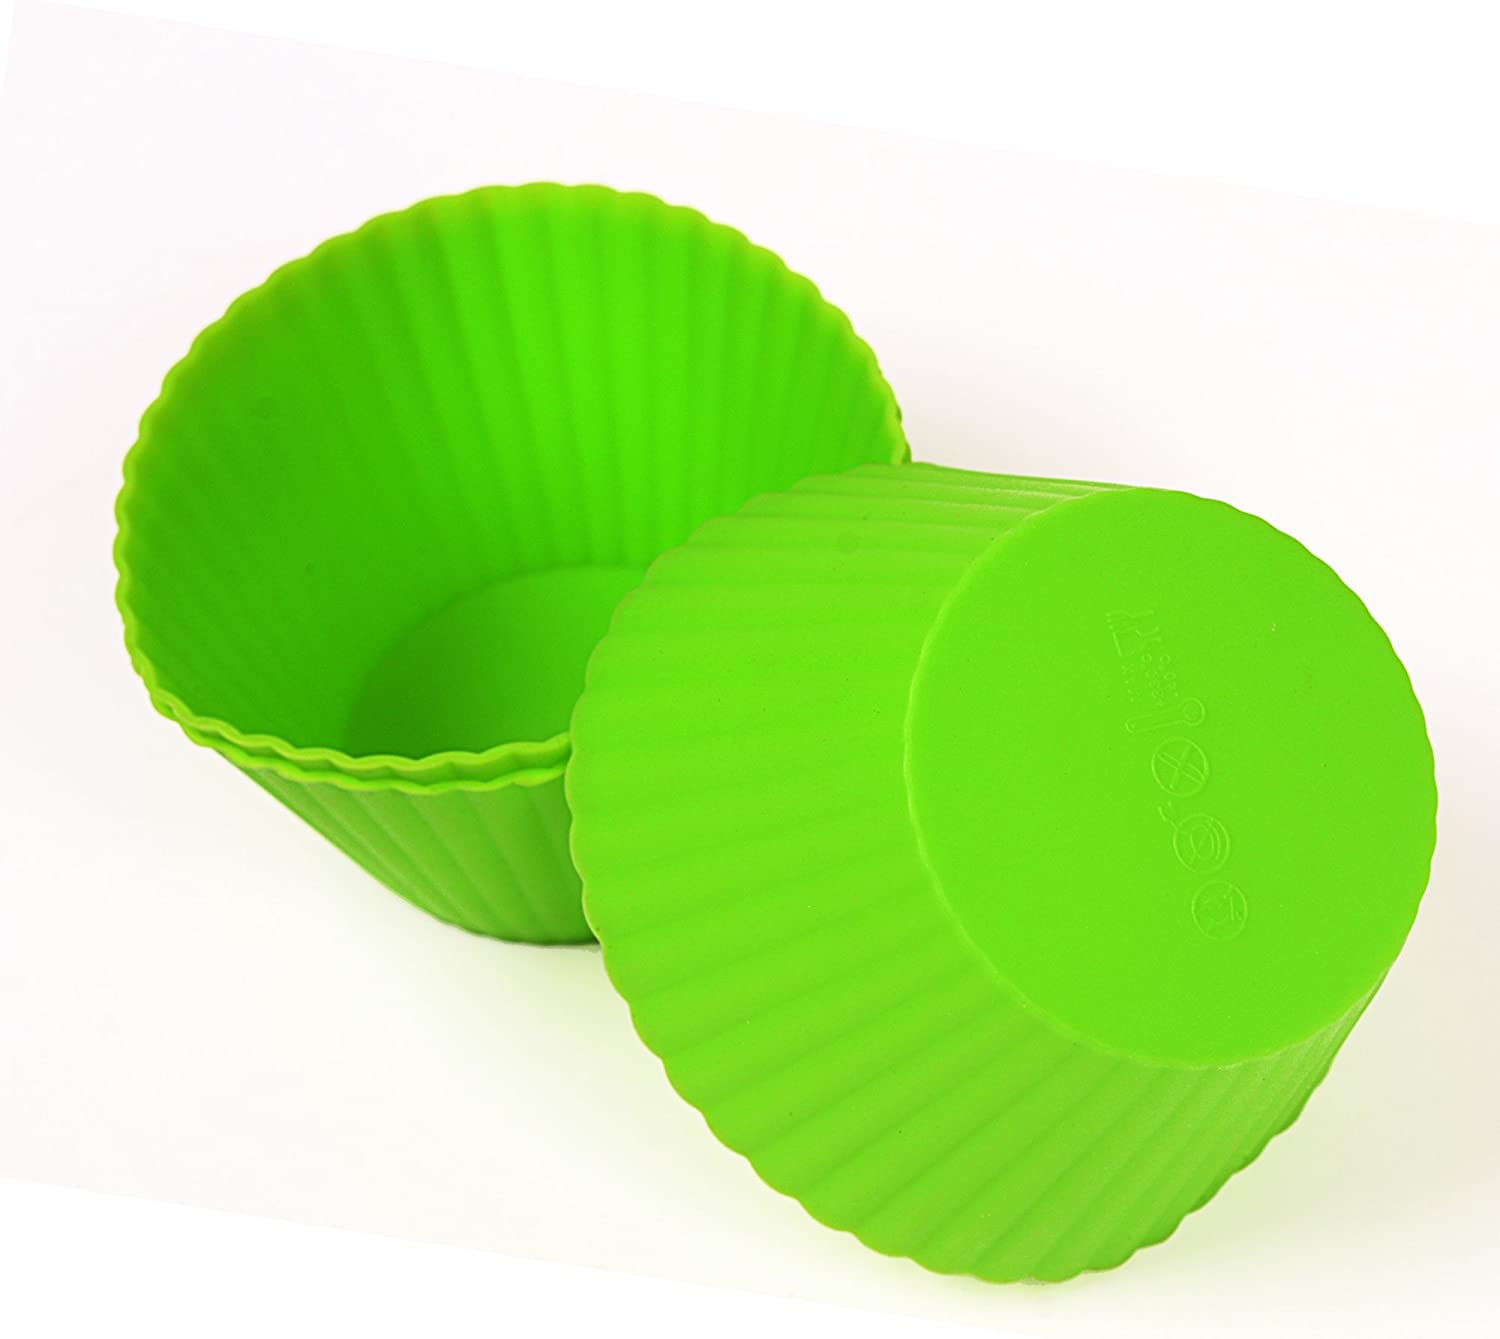 Silicone Jumbo Muffin Pans Nonstick 6 Cup(2 Pack) - 3.5 Inch Large